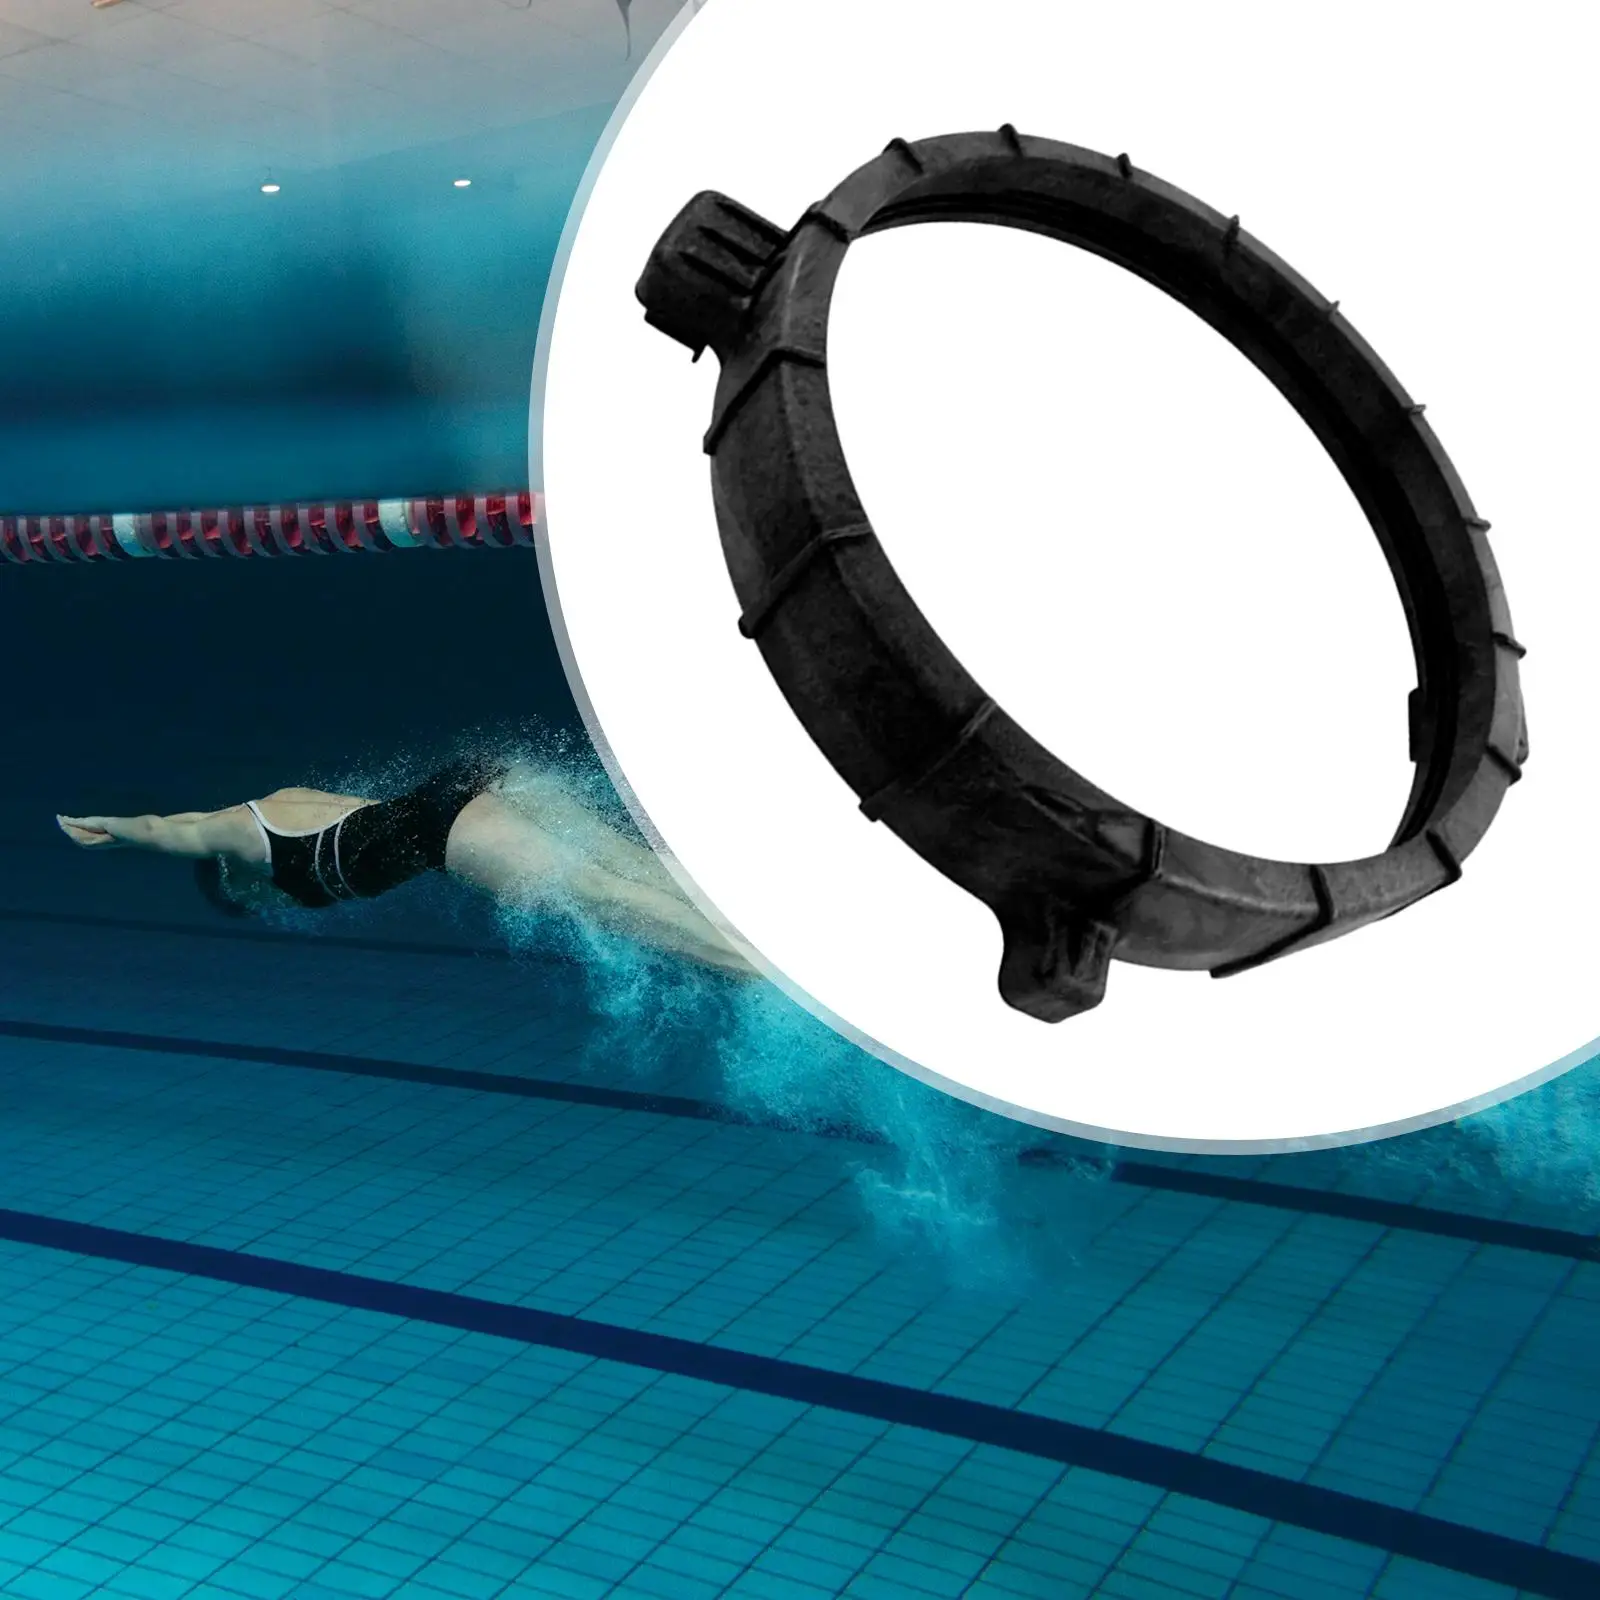 Lock Ring Assembly Water Treatment 59052900 Swimming Pool Accessories Easy to Install Pool Filter Component Replacement Part